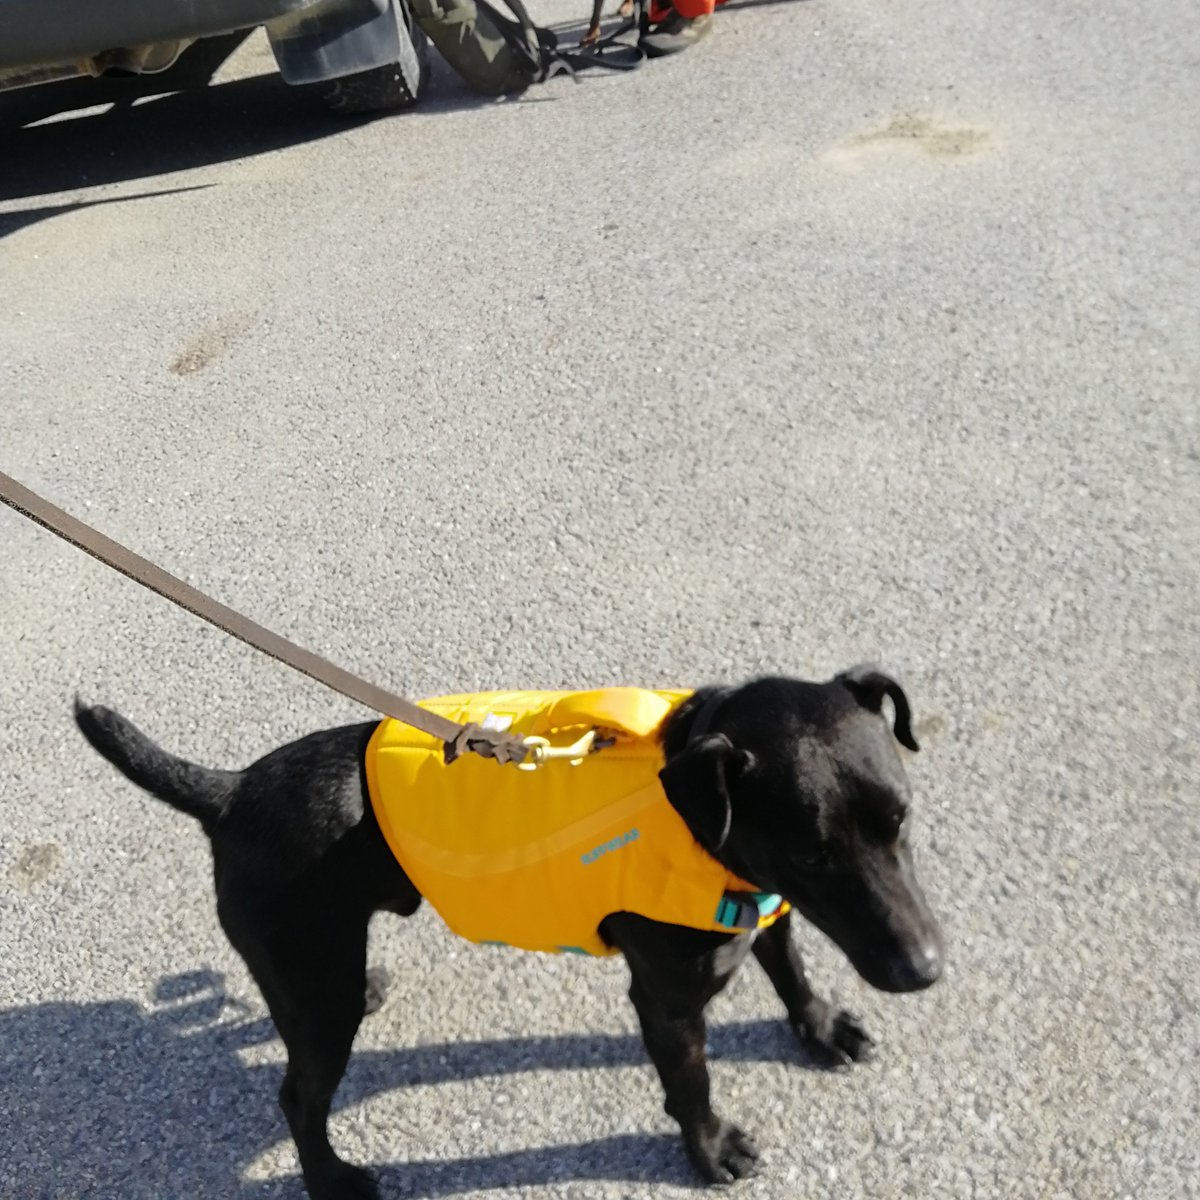 A long zodiac ride out to a vessel today meant the dogs got to use their new lifejackets; King is looking particularly smart in his yellow one #detectiondog #safetyatsea #workingdog #doglifejacket #rodentdog #biosecuritydog #GGSSI #SGHT